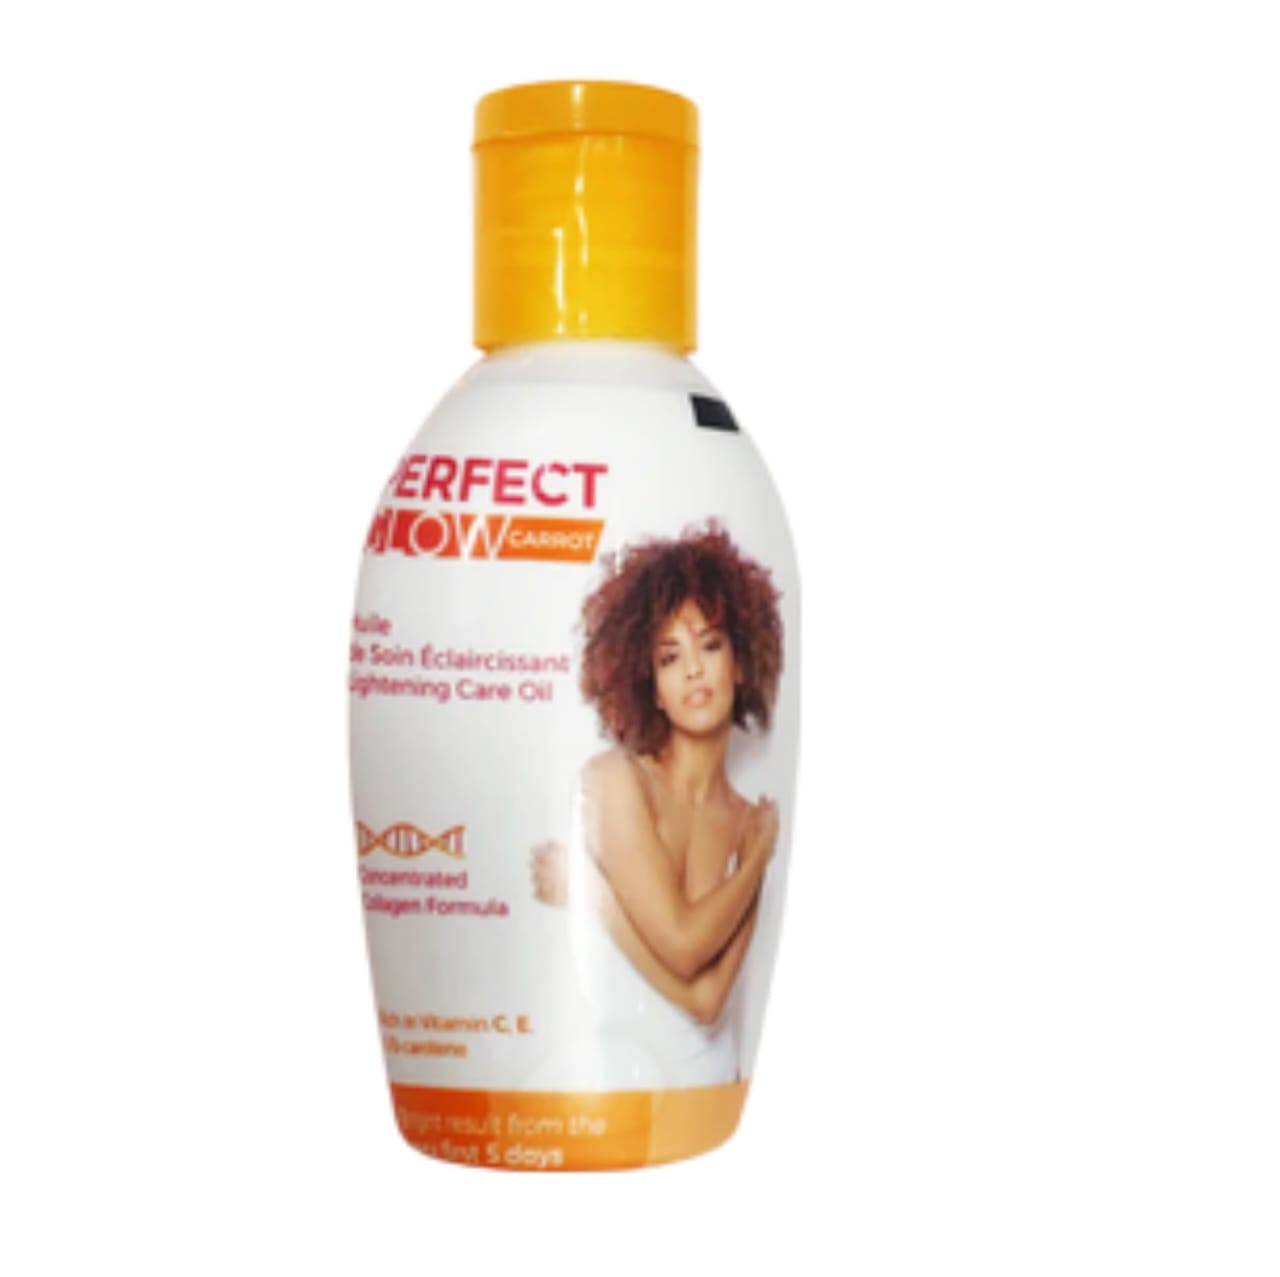 Perfect Glow Carrot Lightening Care Oil